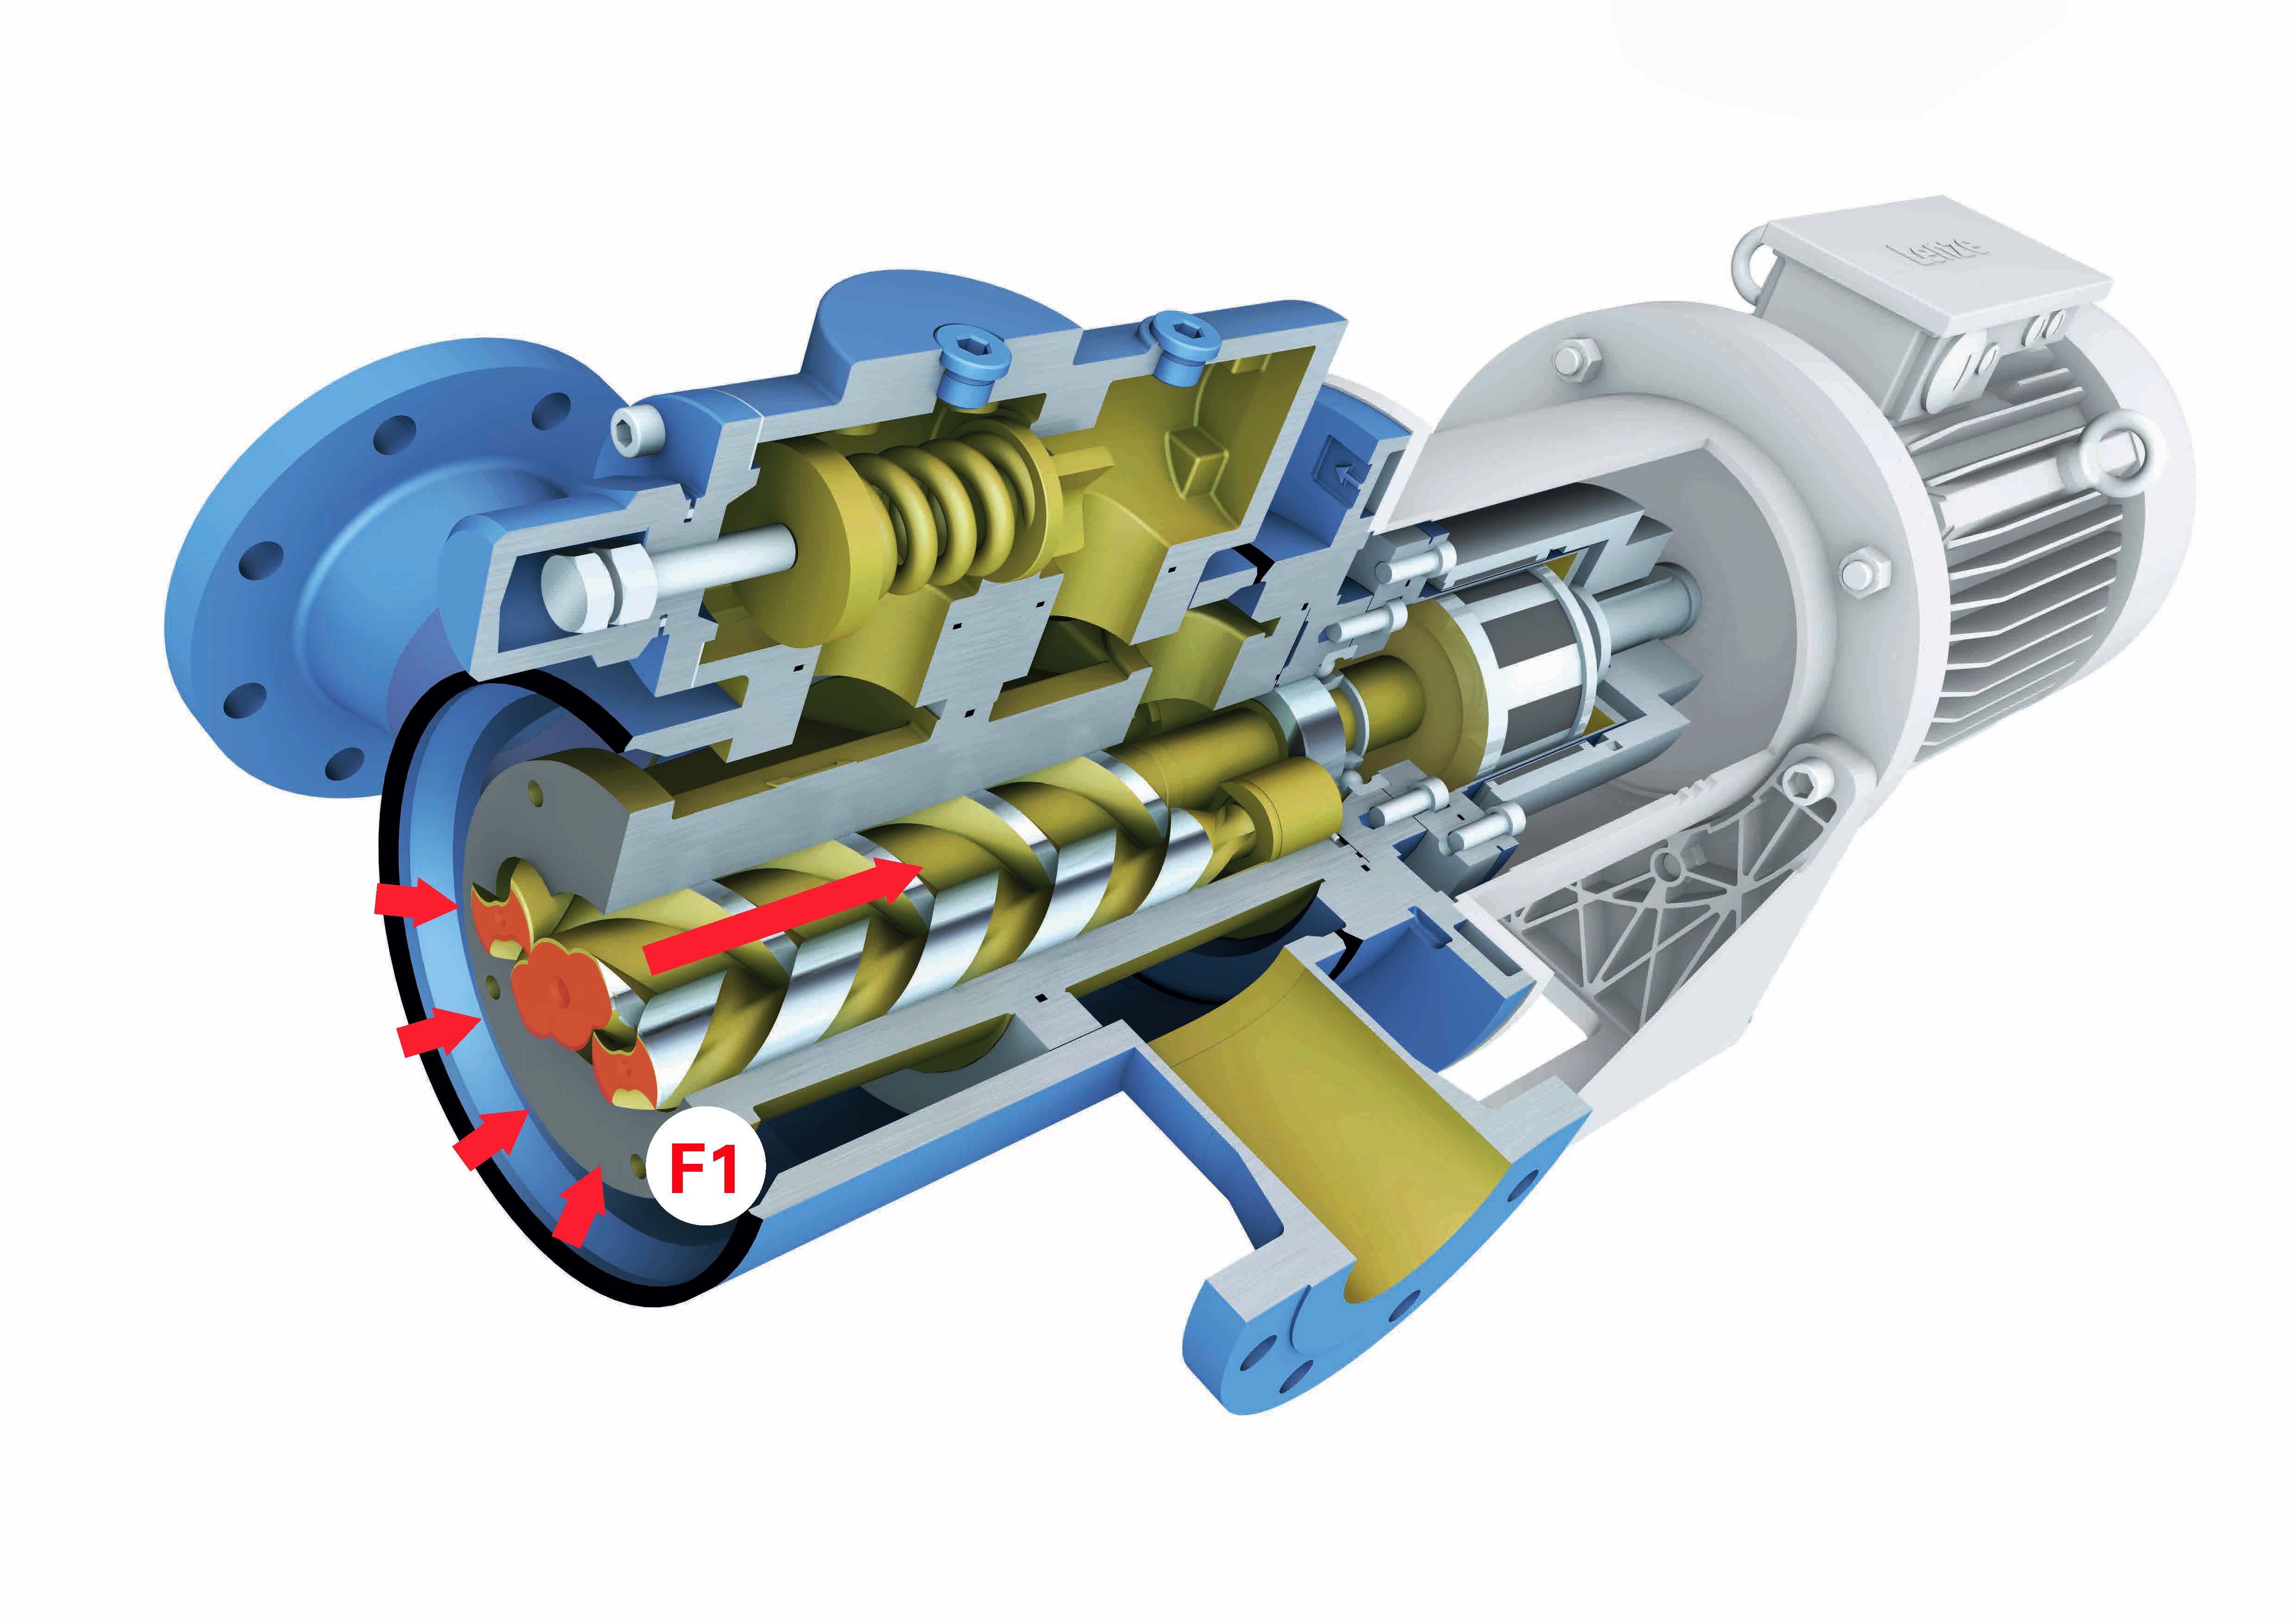 Screw pumps with magnetic coupling